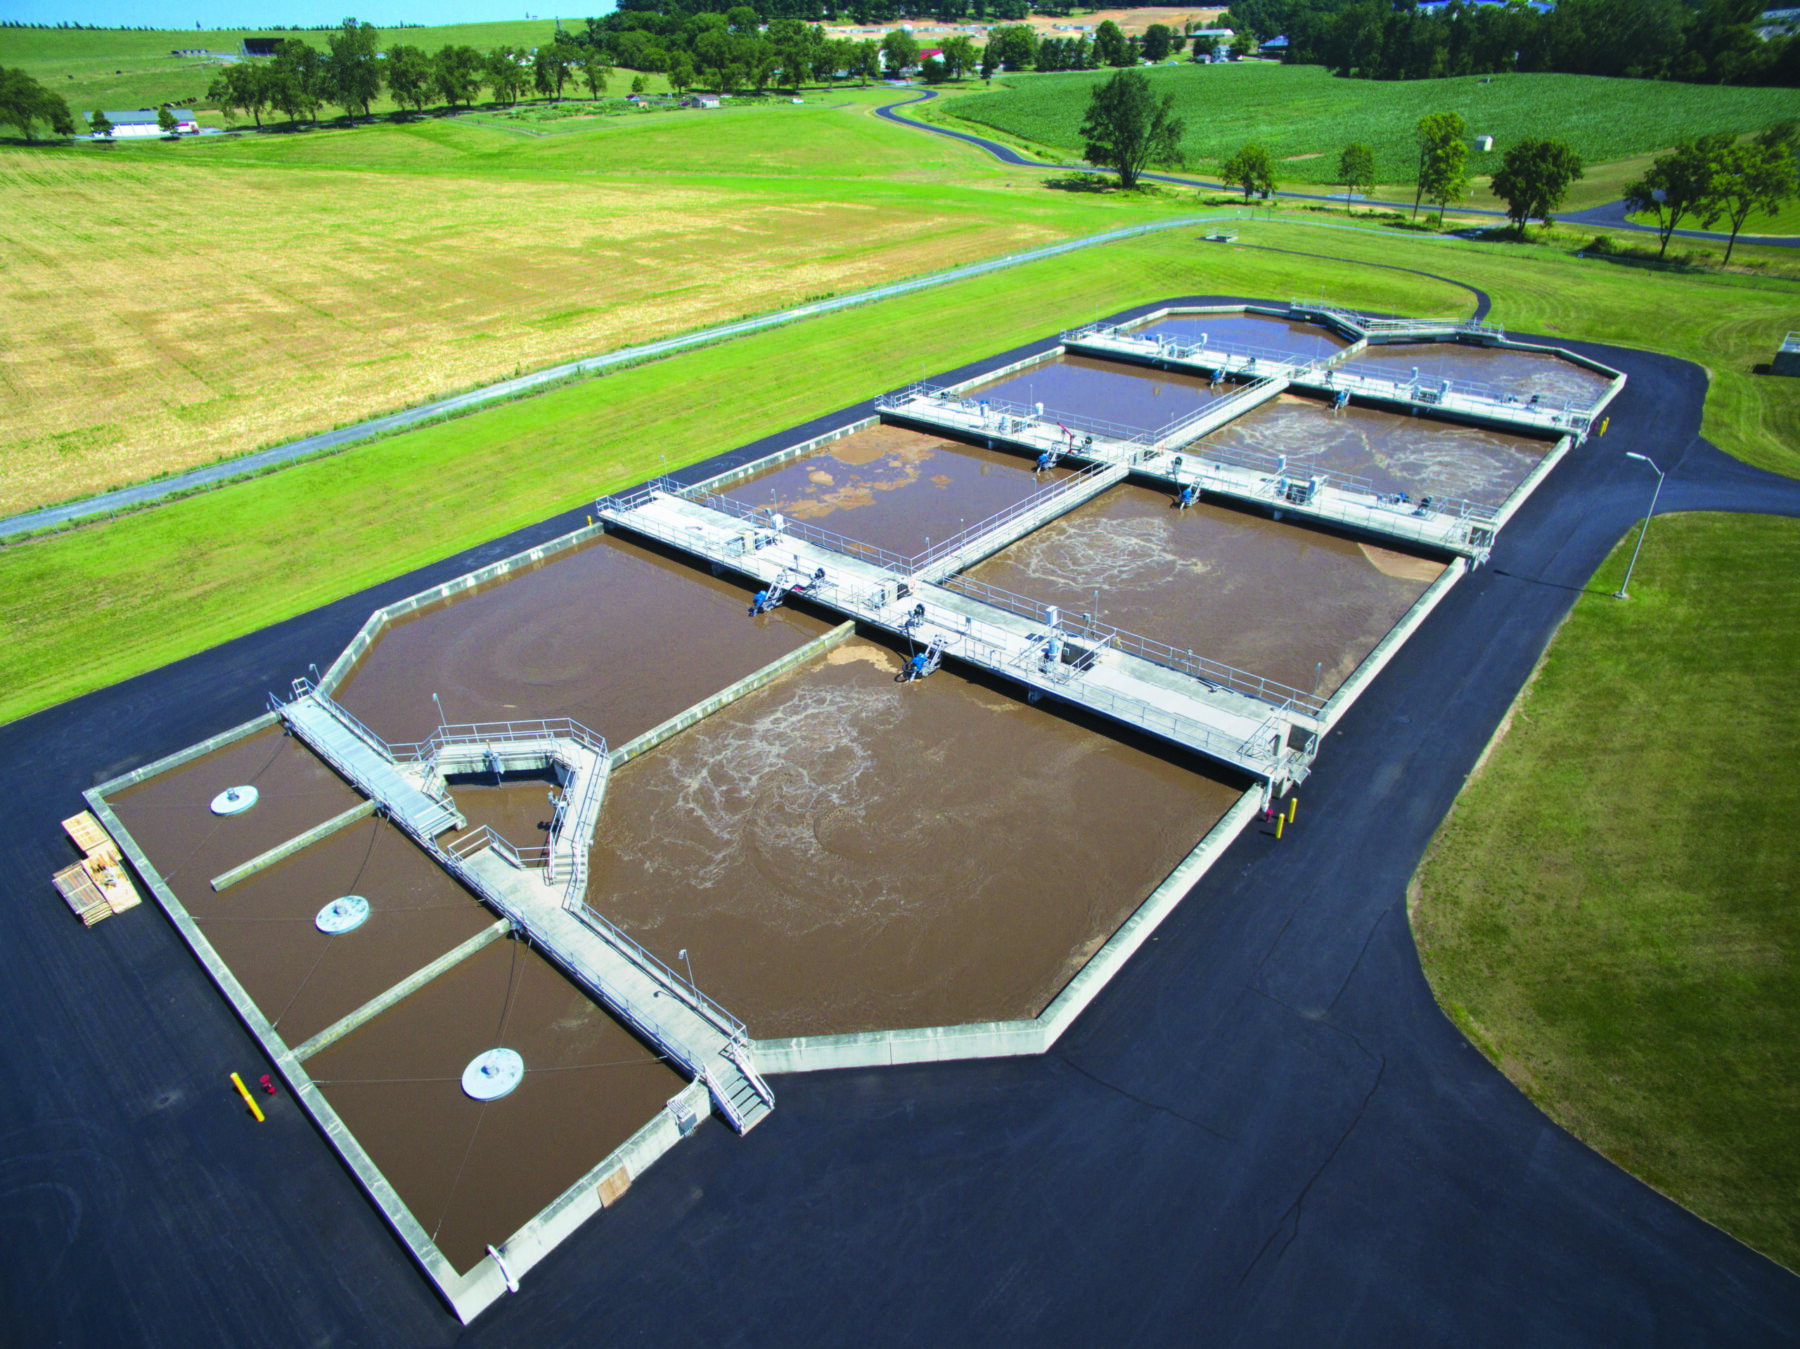 Aerial view of an open air water treatment system consisting of a series of concrete ponds connected by walkways and utilizing Newterra Trion 2.0 series process aerator mixers to stir treatment water in an open field with rural residential home and agricultural operations nearby